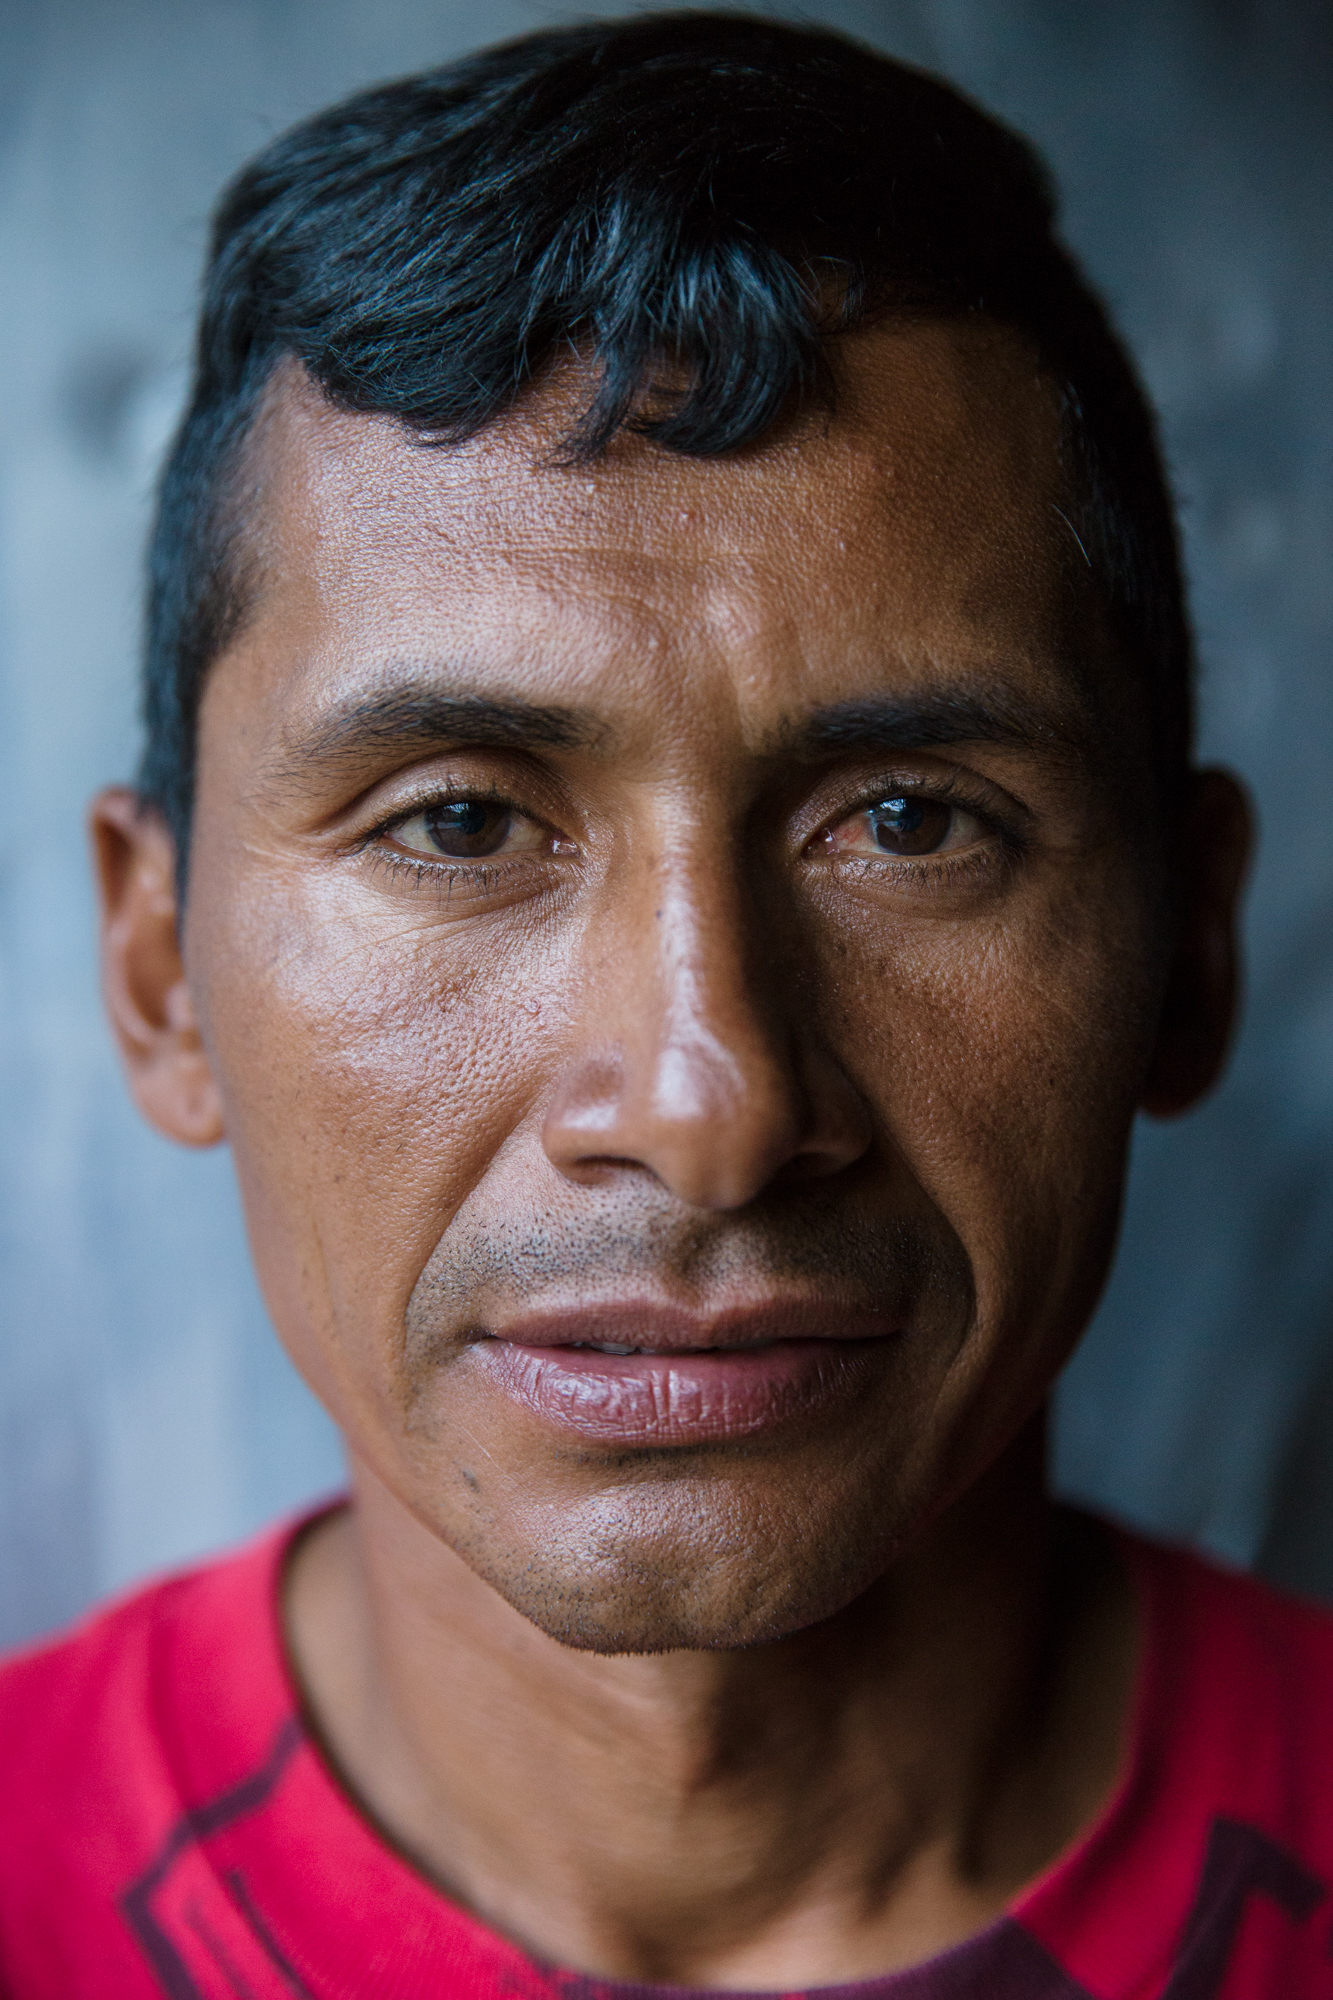  Jairo Blanchard, a former gang member, now runs a non-profit in Matagalpa, Nicaragua, where he works with local youth in an effort to try and intervene in the cycle of gang violence. 